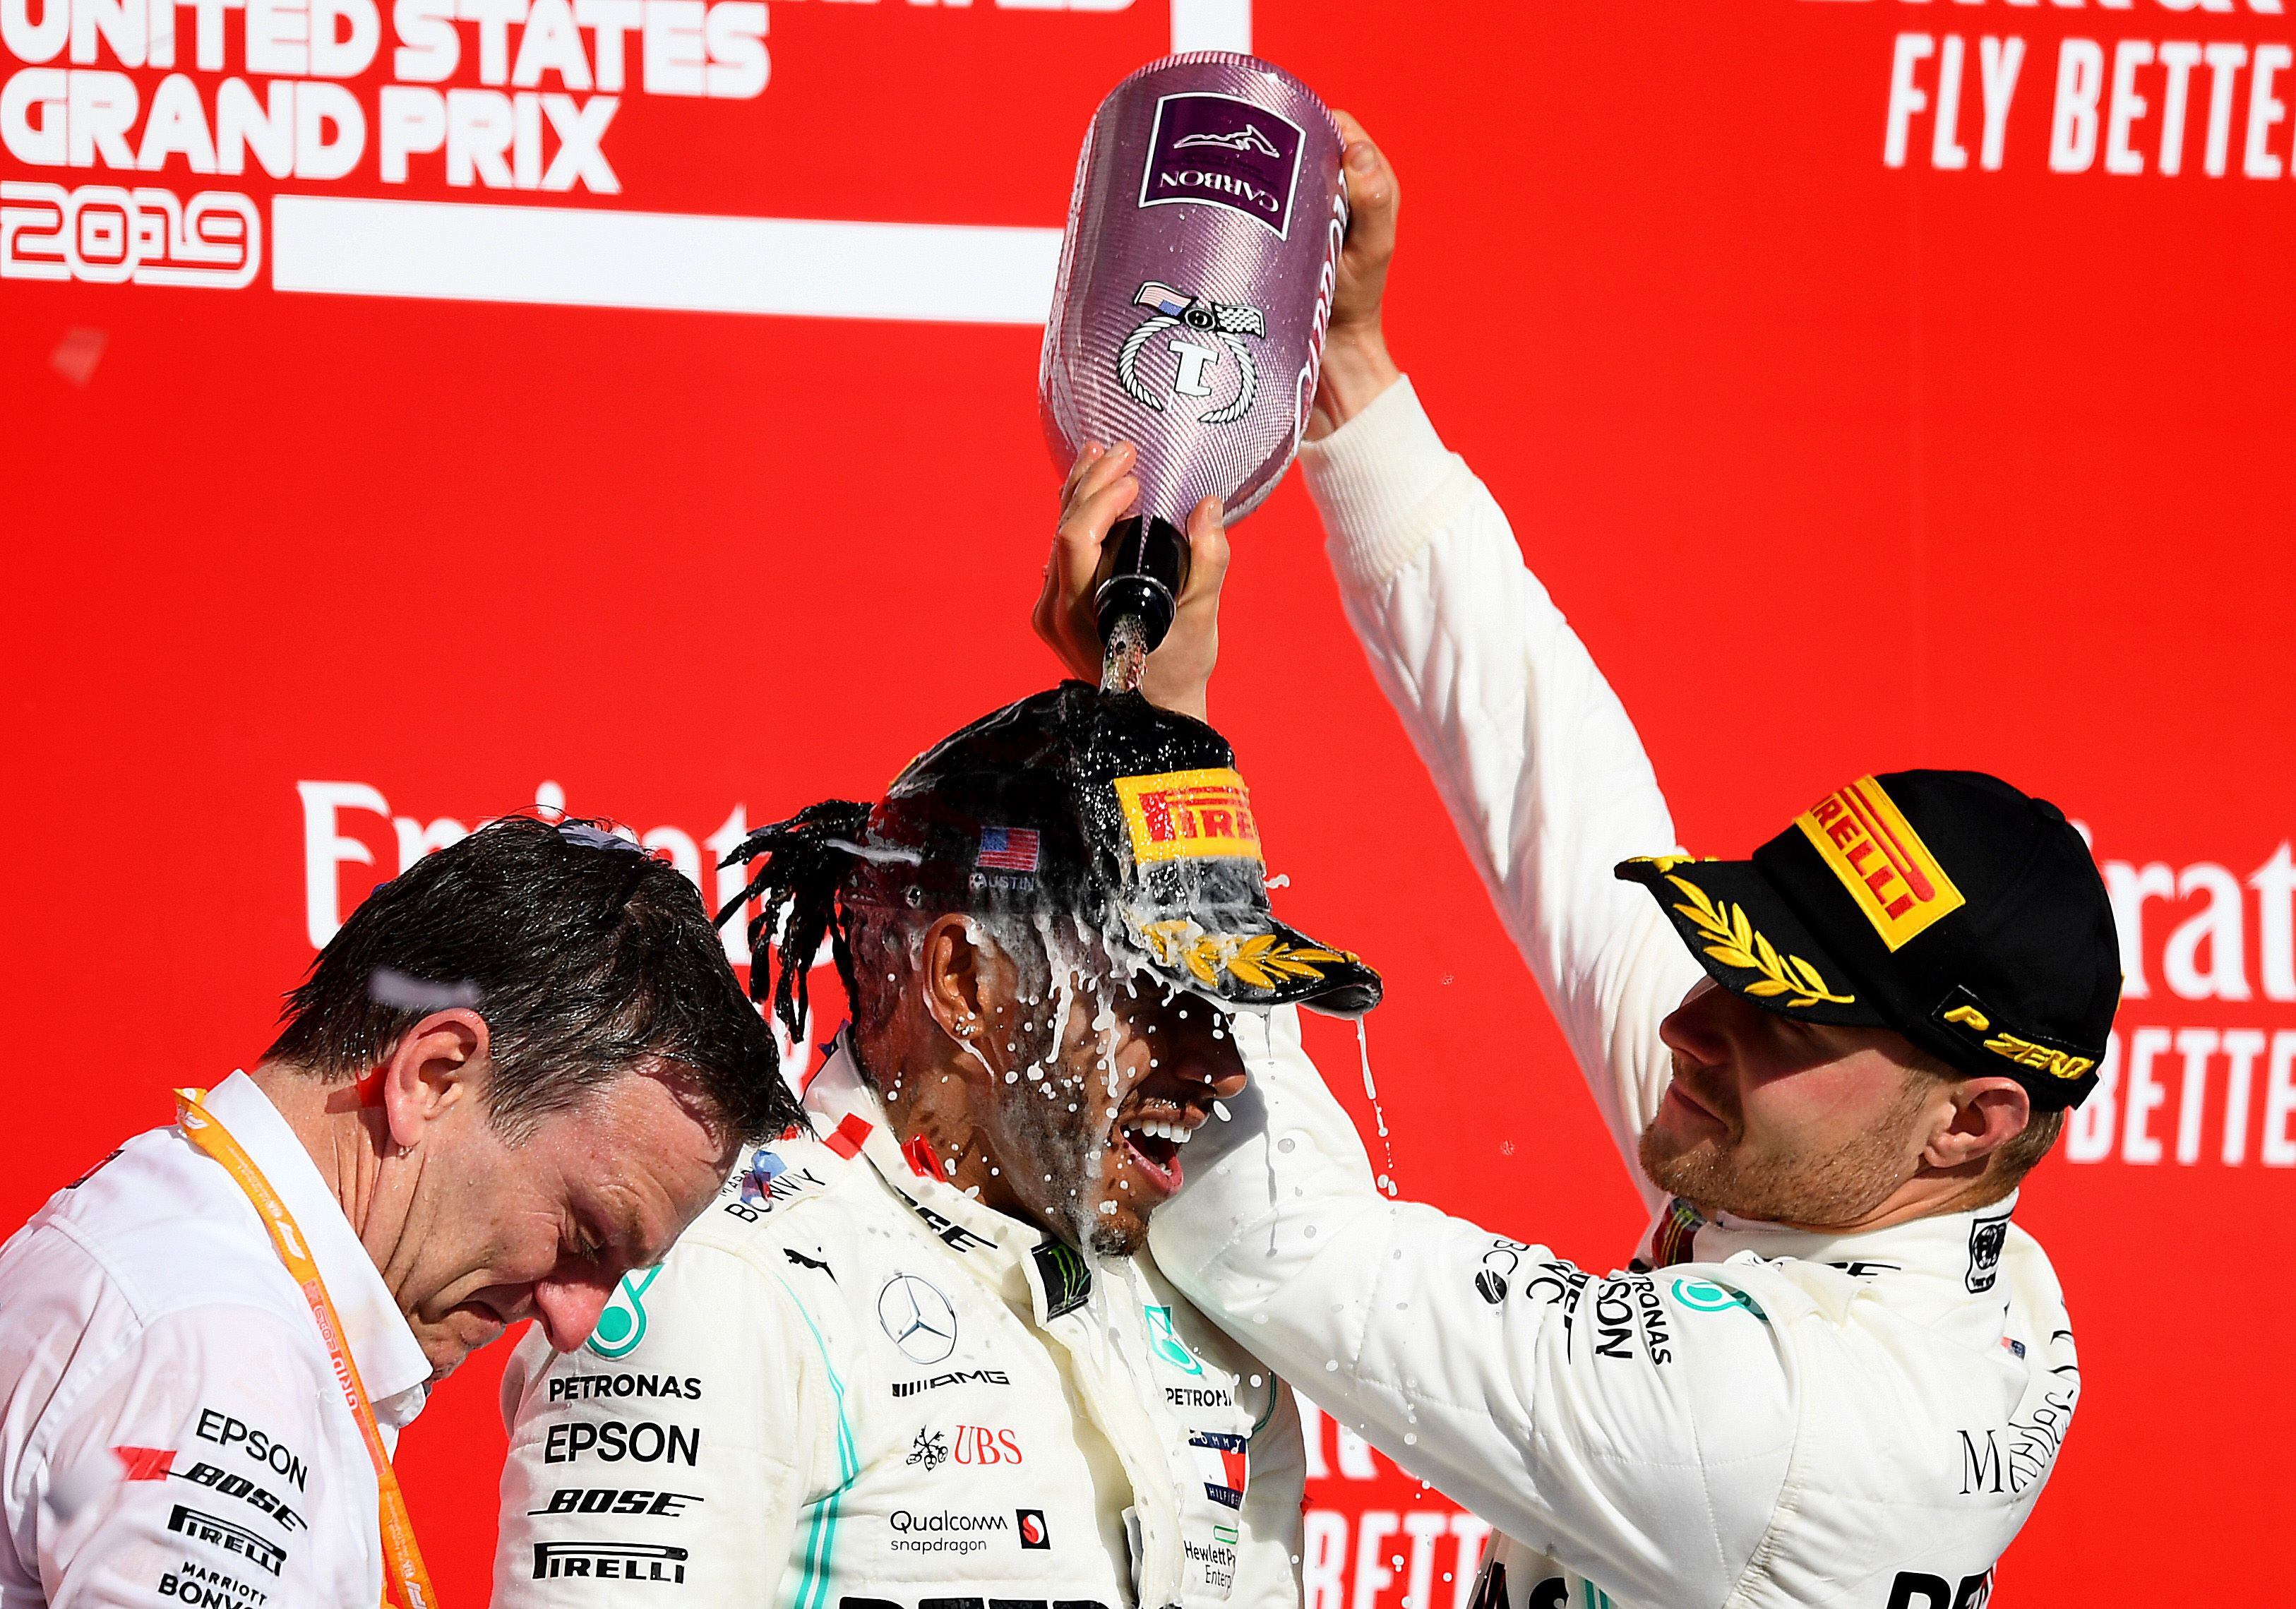 AUSTIN, TEXAS - NOVEMBER 03: Race winner Valtteri Bottas of Finland and Mercedes GP, 2019 Formula One World Drivers Champion Lewis Hamilton of Great Britain and Mercedes GP and James Allison, Technical Director at Mercedes GP celebrate on the podium during the F1 Grand Prix of USA at Circuit of The Americas on November 03, 2019 in Austin, Texas.   Clive Mason/Getty Images/AFP
== FOR NEWSPAPERS, INTERNET, TELCOS & TELEVISION USE ONLY ==
